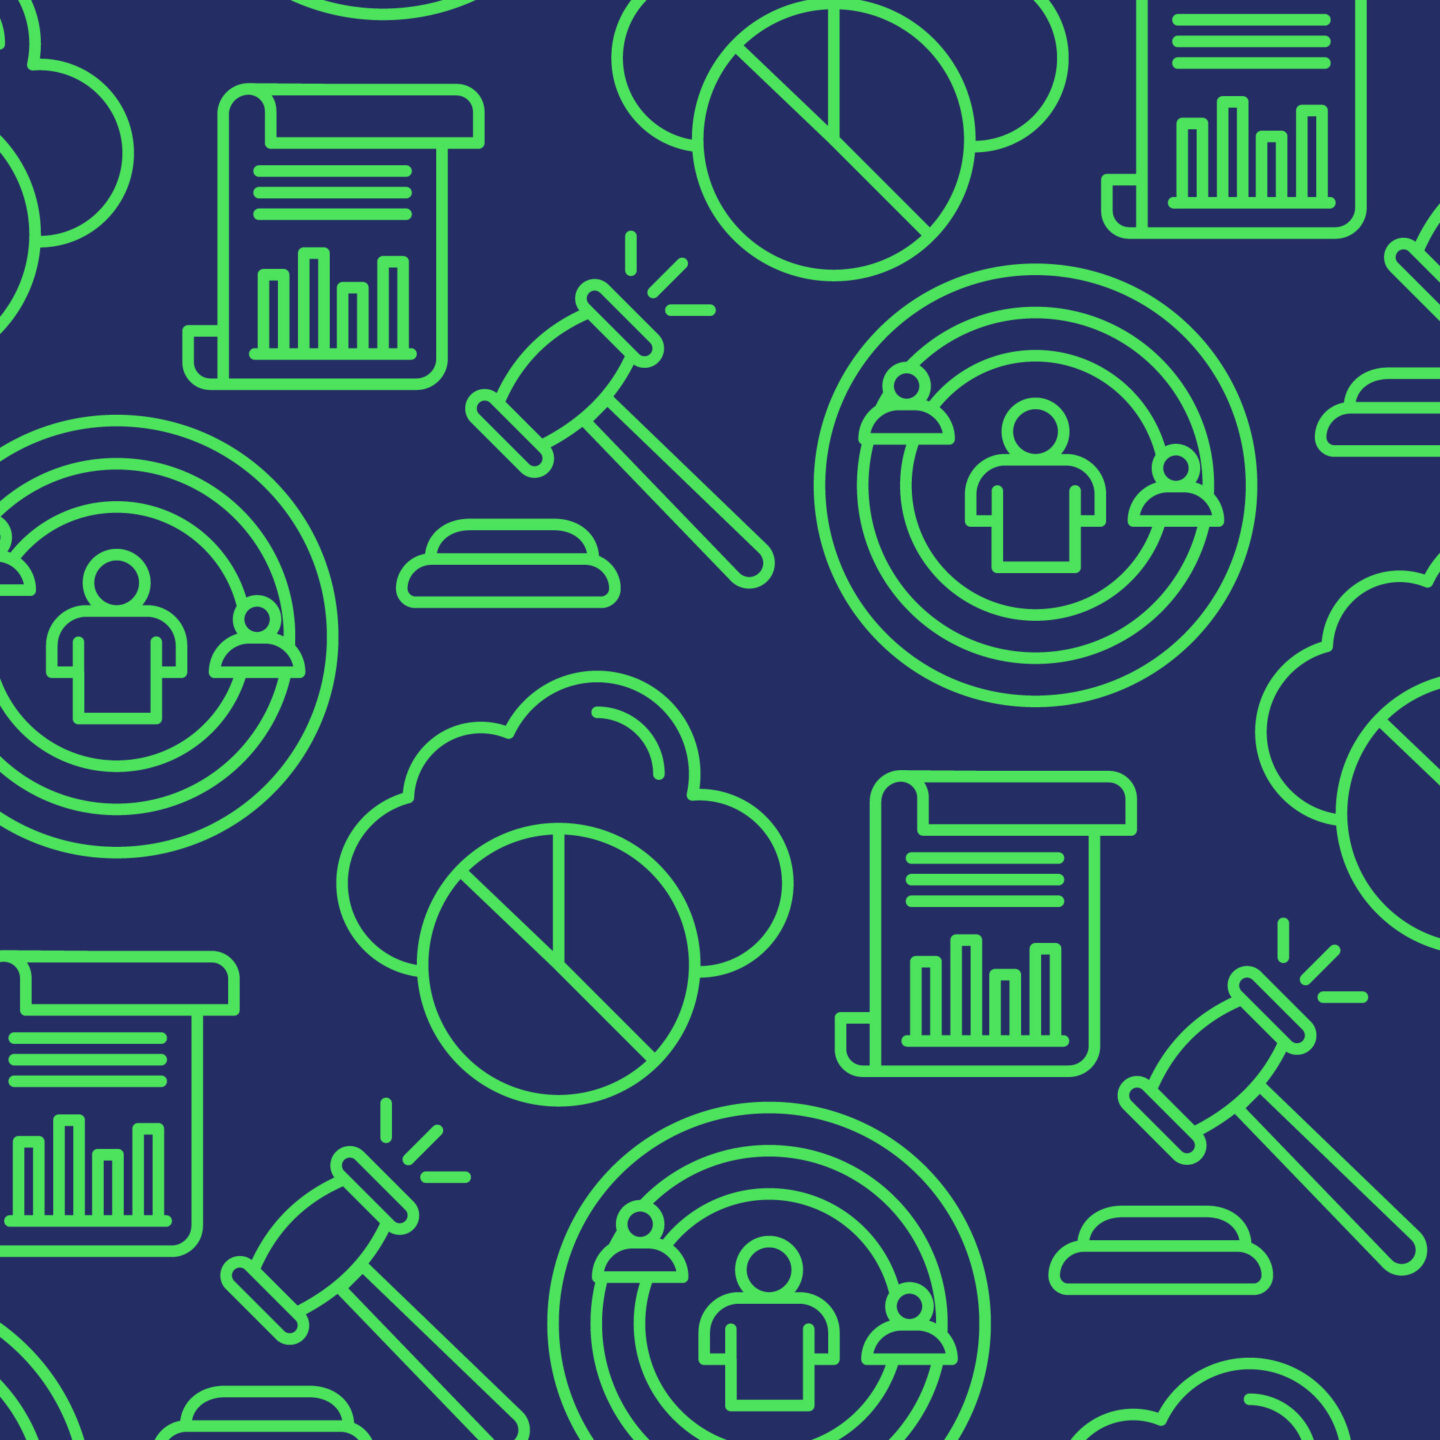 Various icons in neon green of pie charts, reports, regulation, and networking.